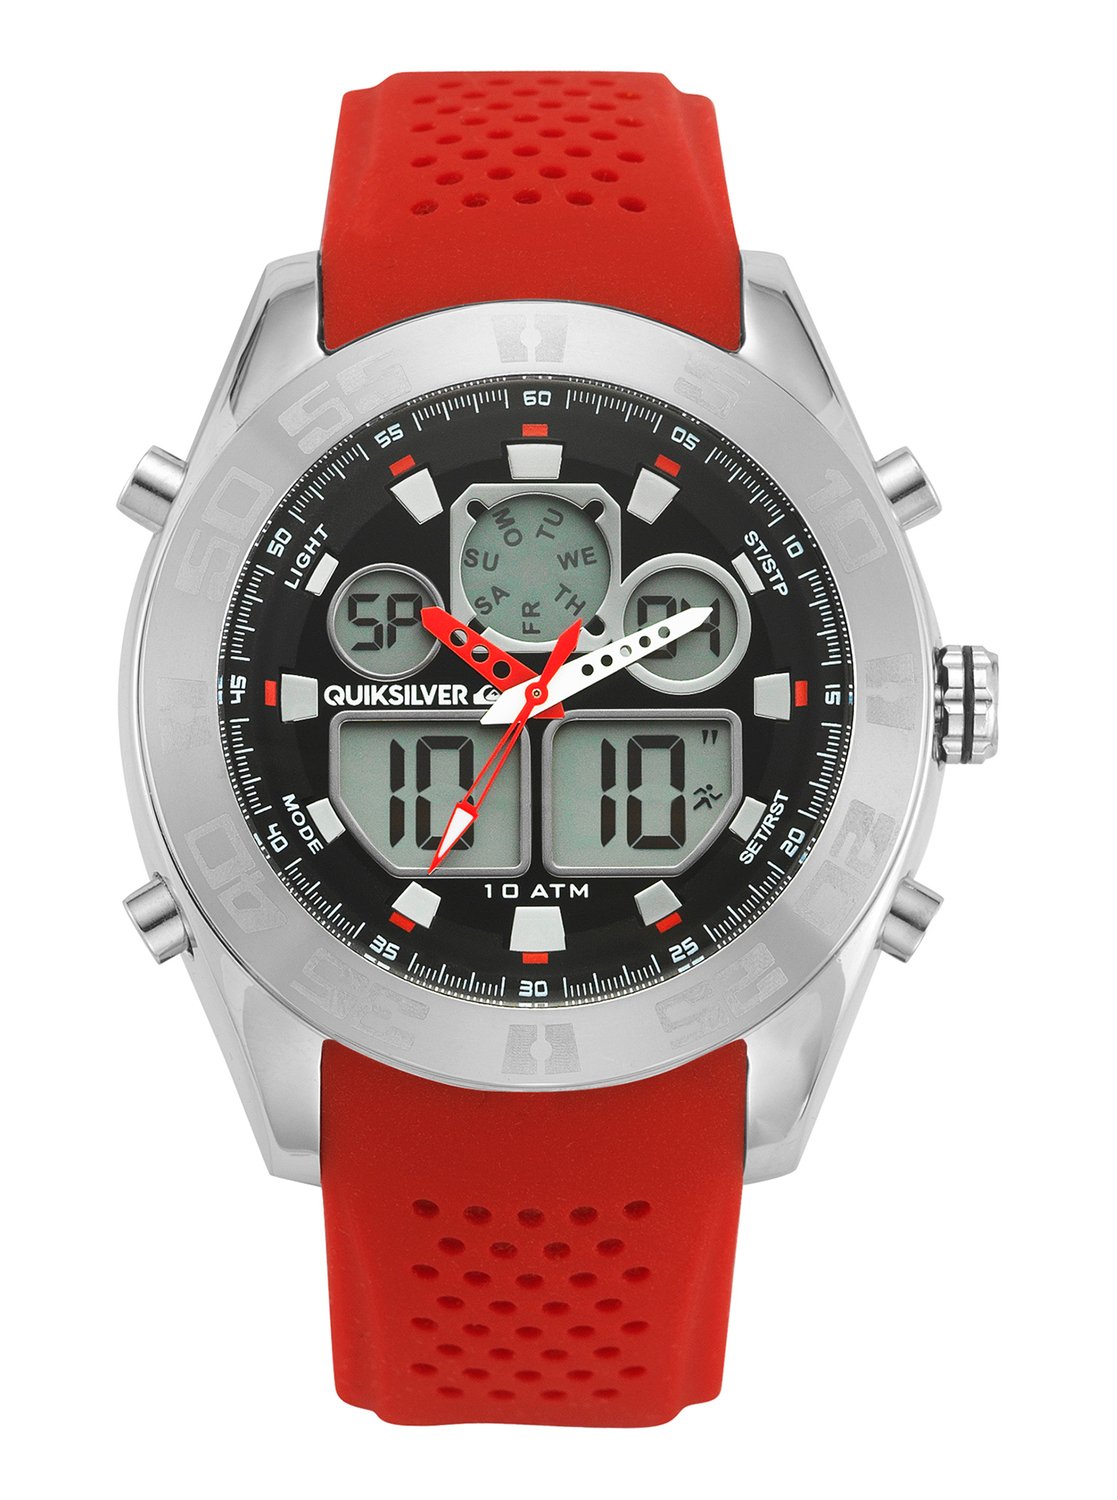 The Fifty50 Watch QS1017 | Quiksilver